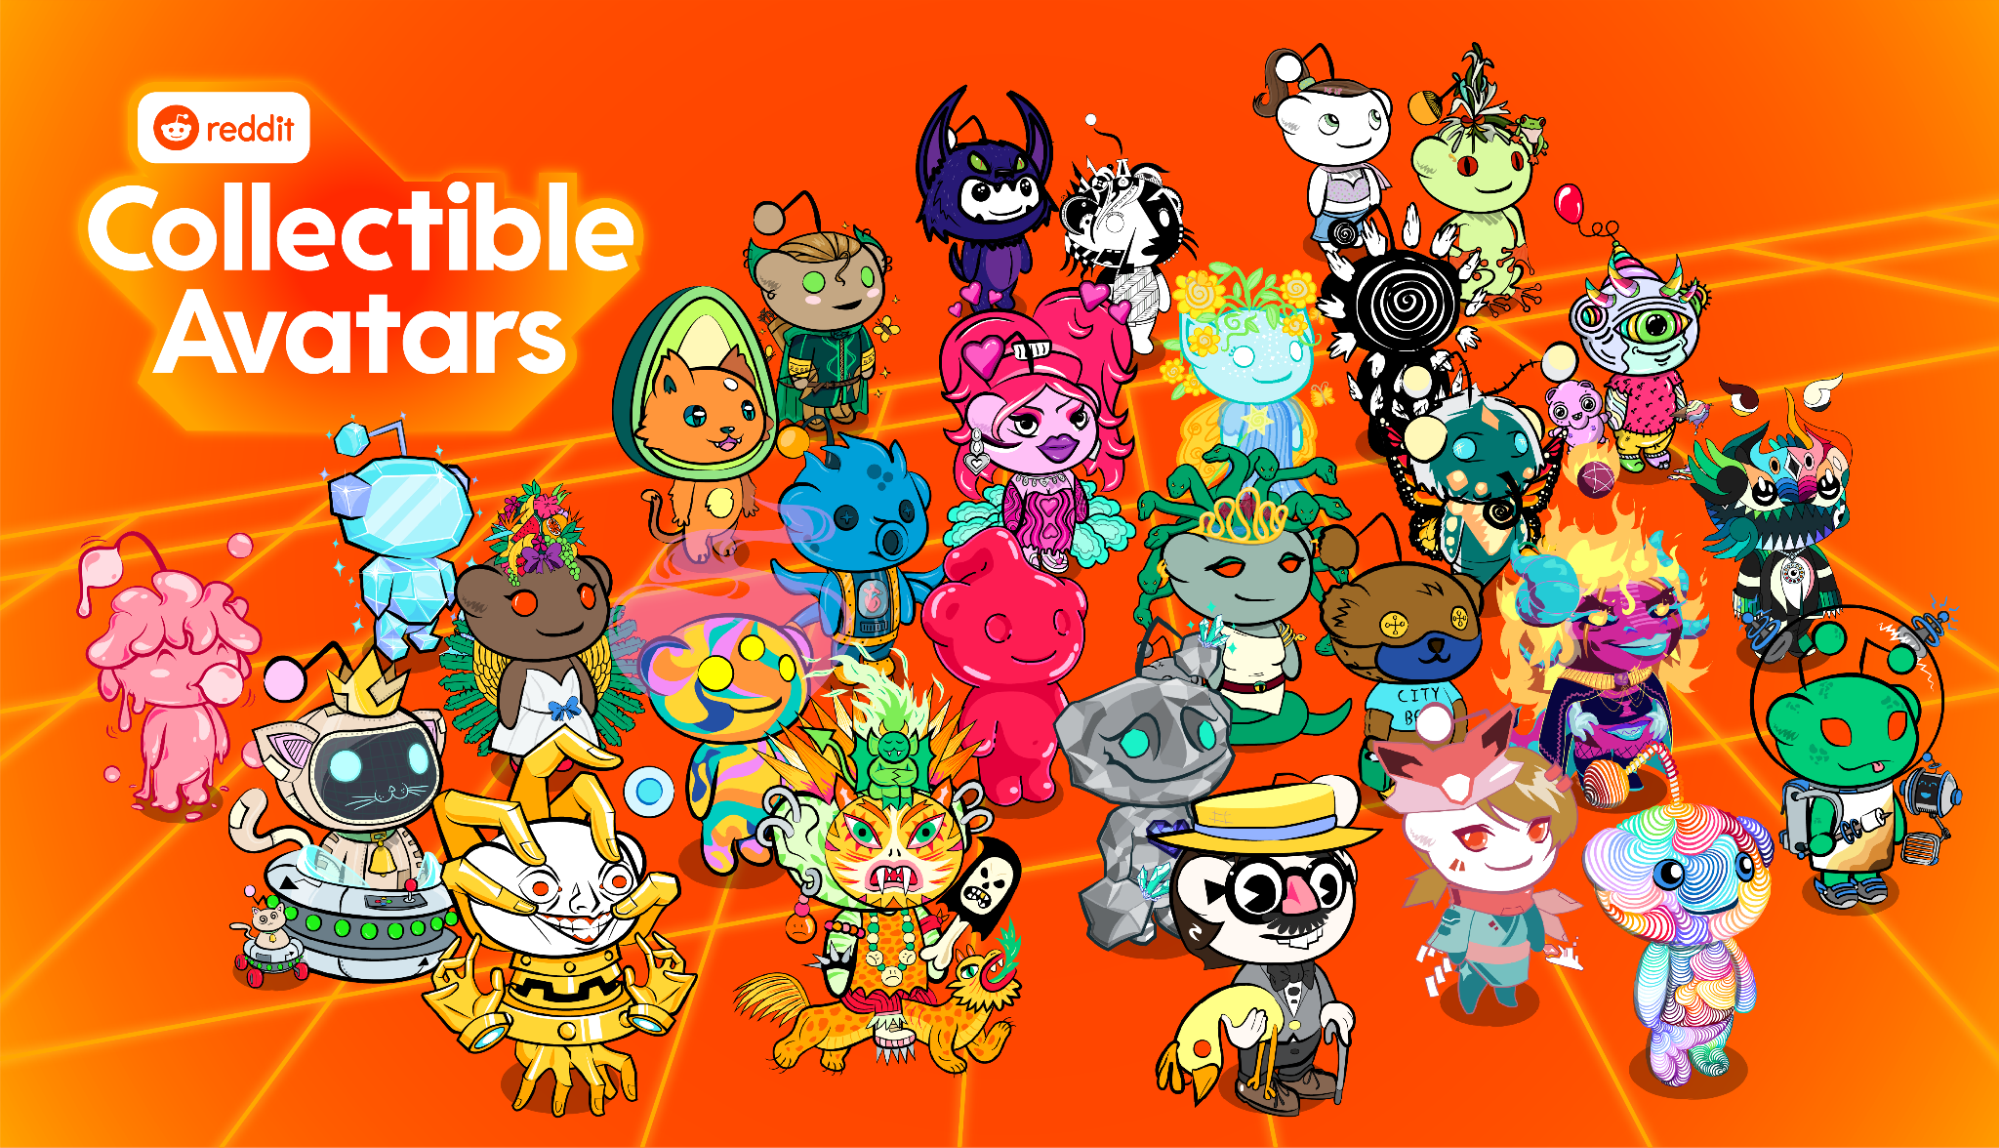 Reddit Collectible Avatar Holders Exceed 7.3M Ahead of Gen 3 Roll Out 